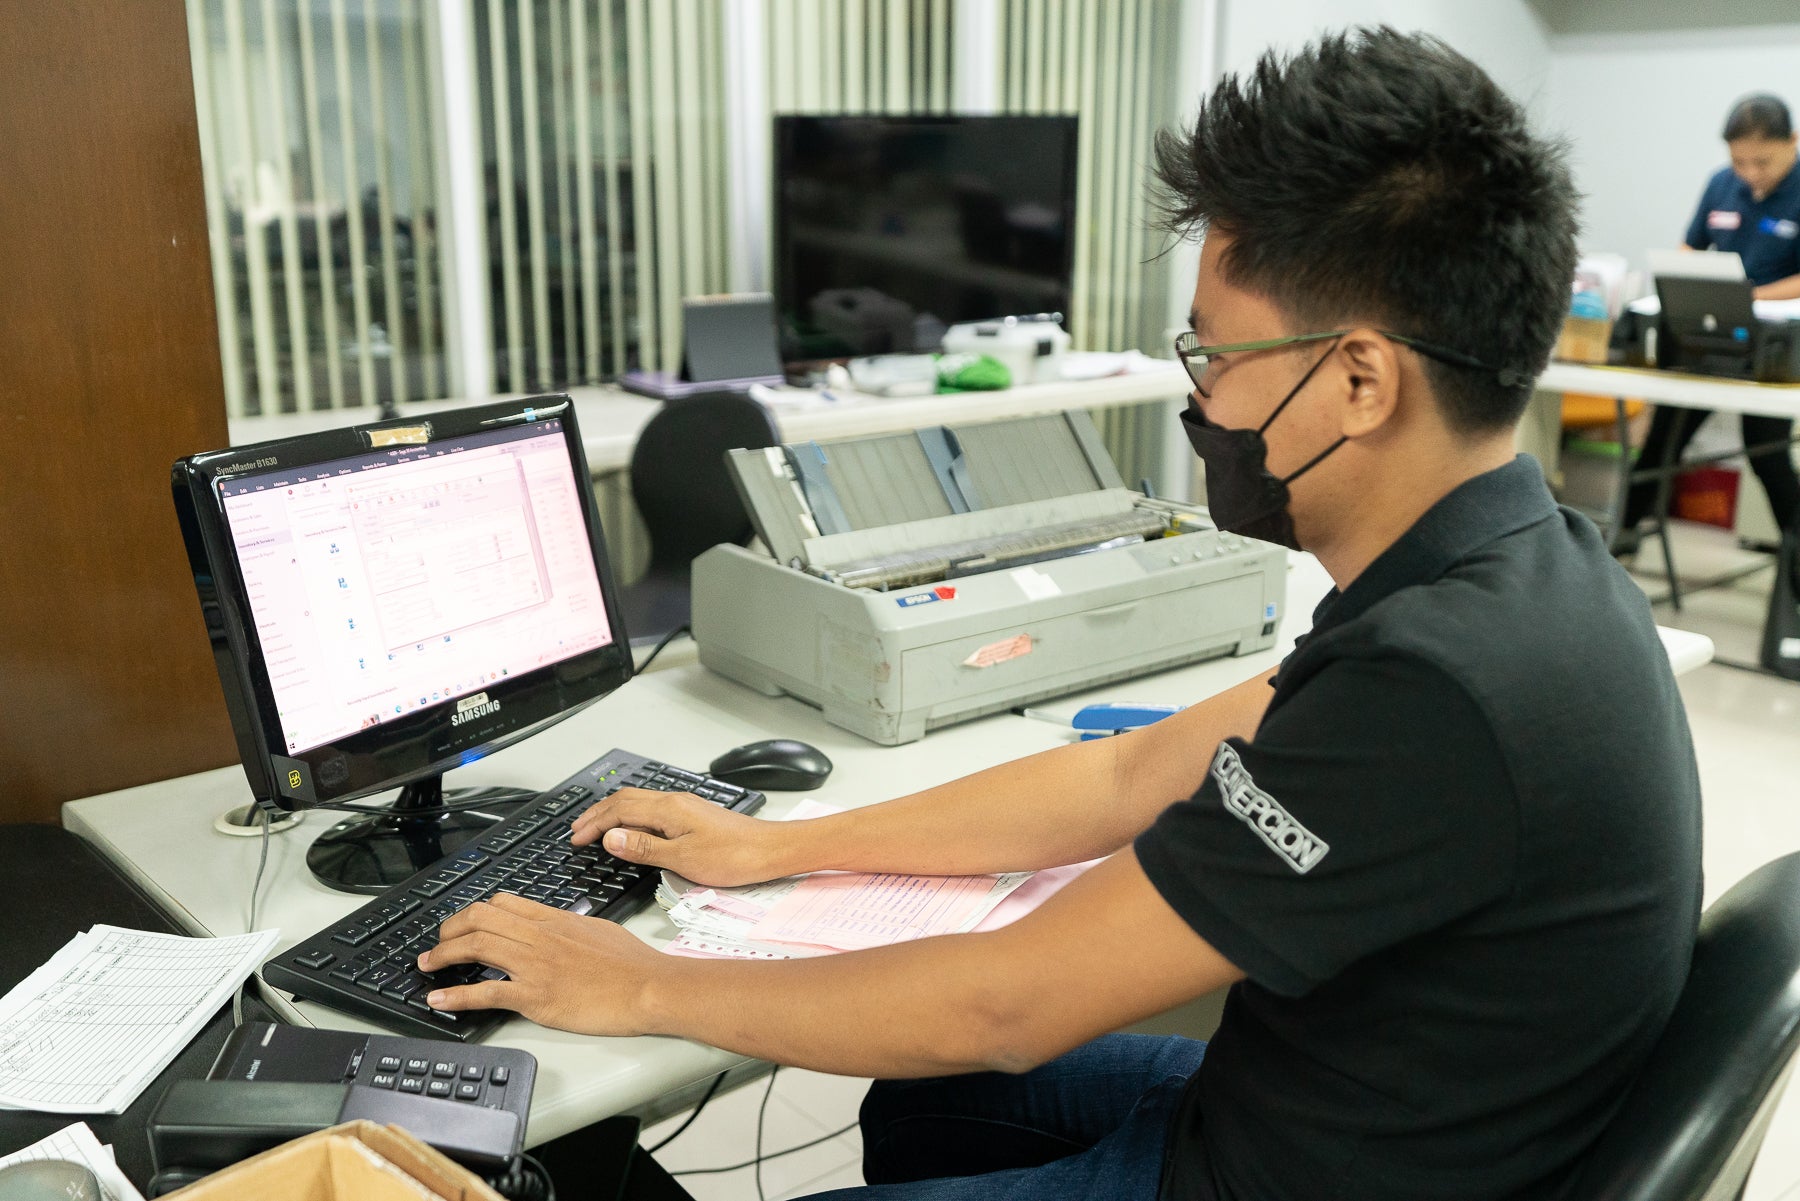 Office Worker wearing a black shirt, glasses and a mask doing data entry using a computer and printers